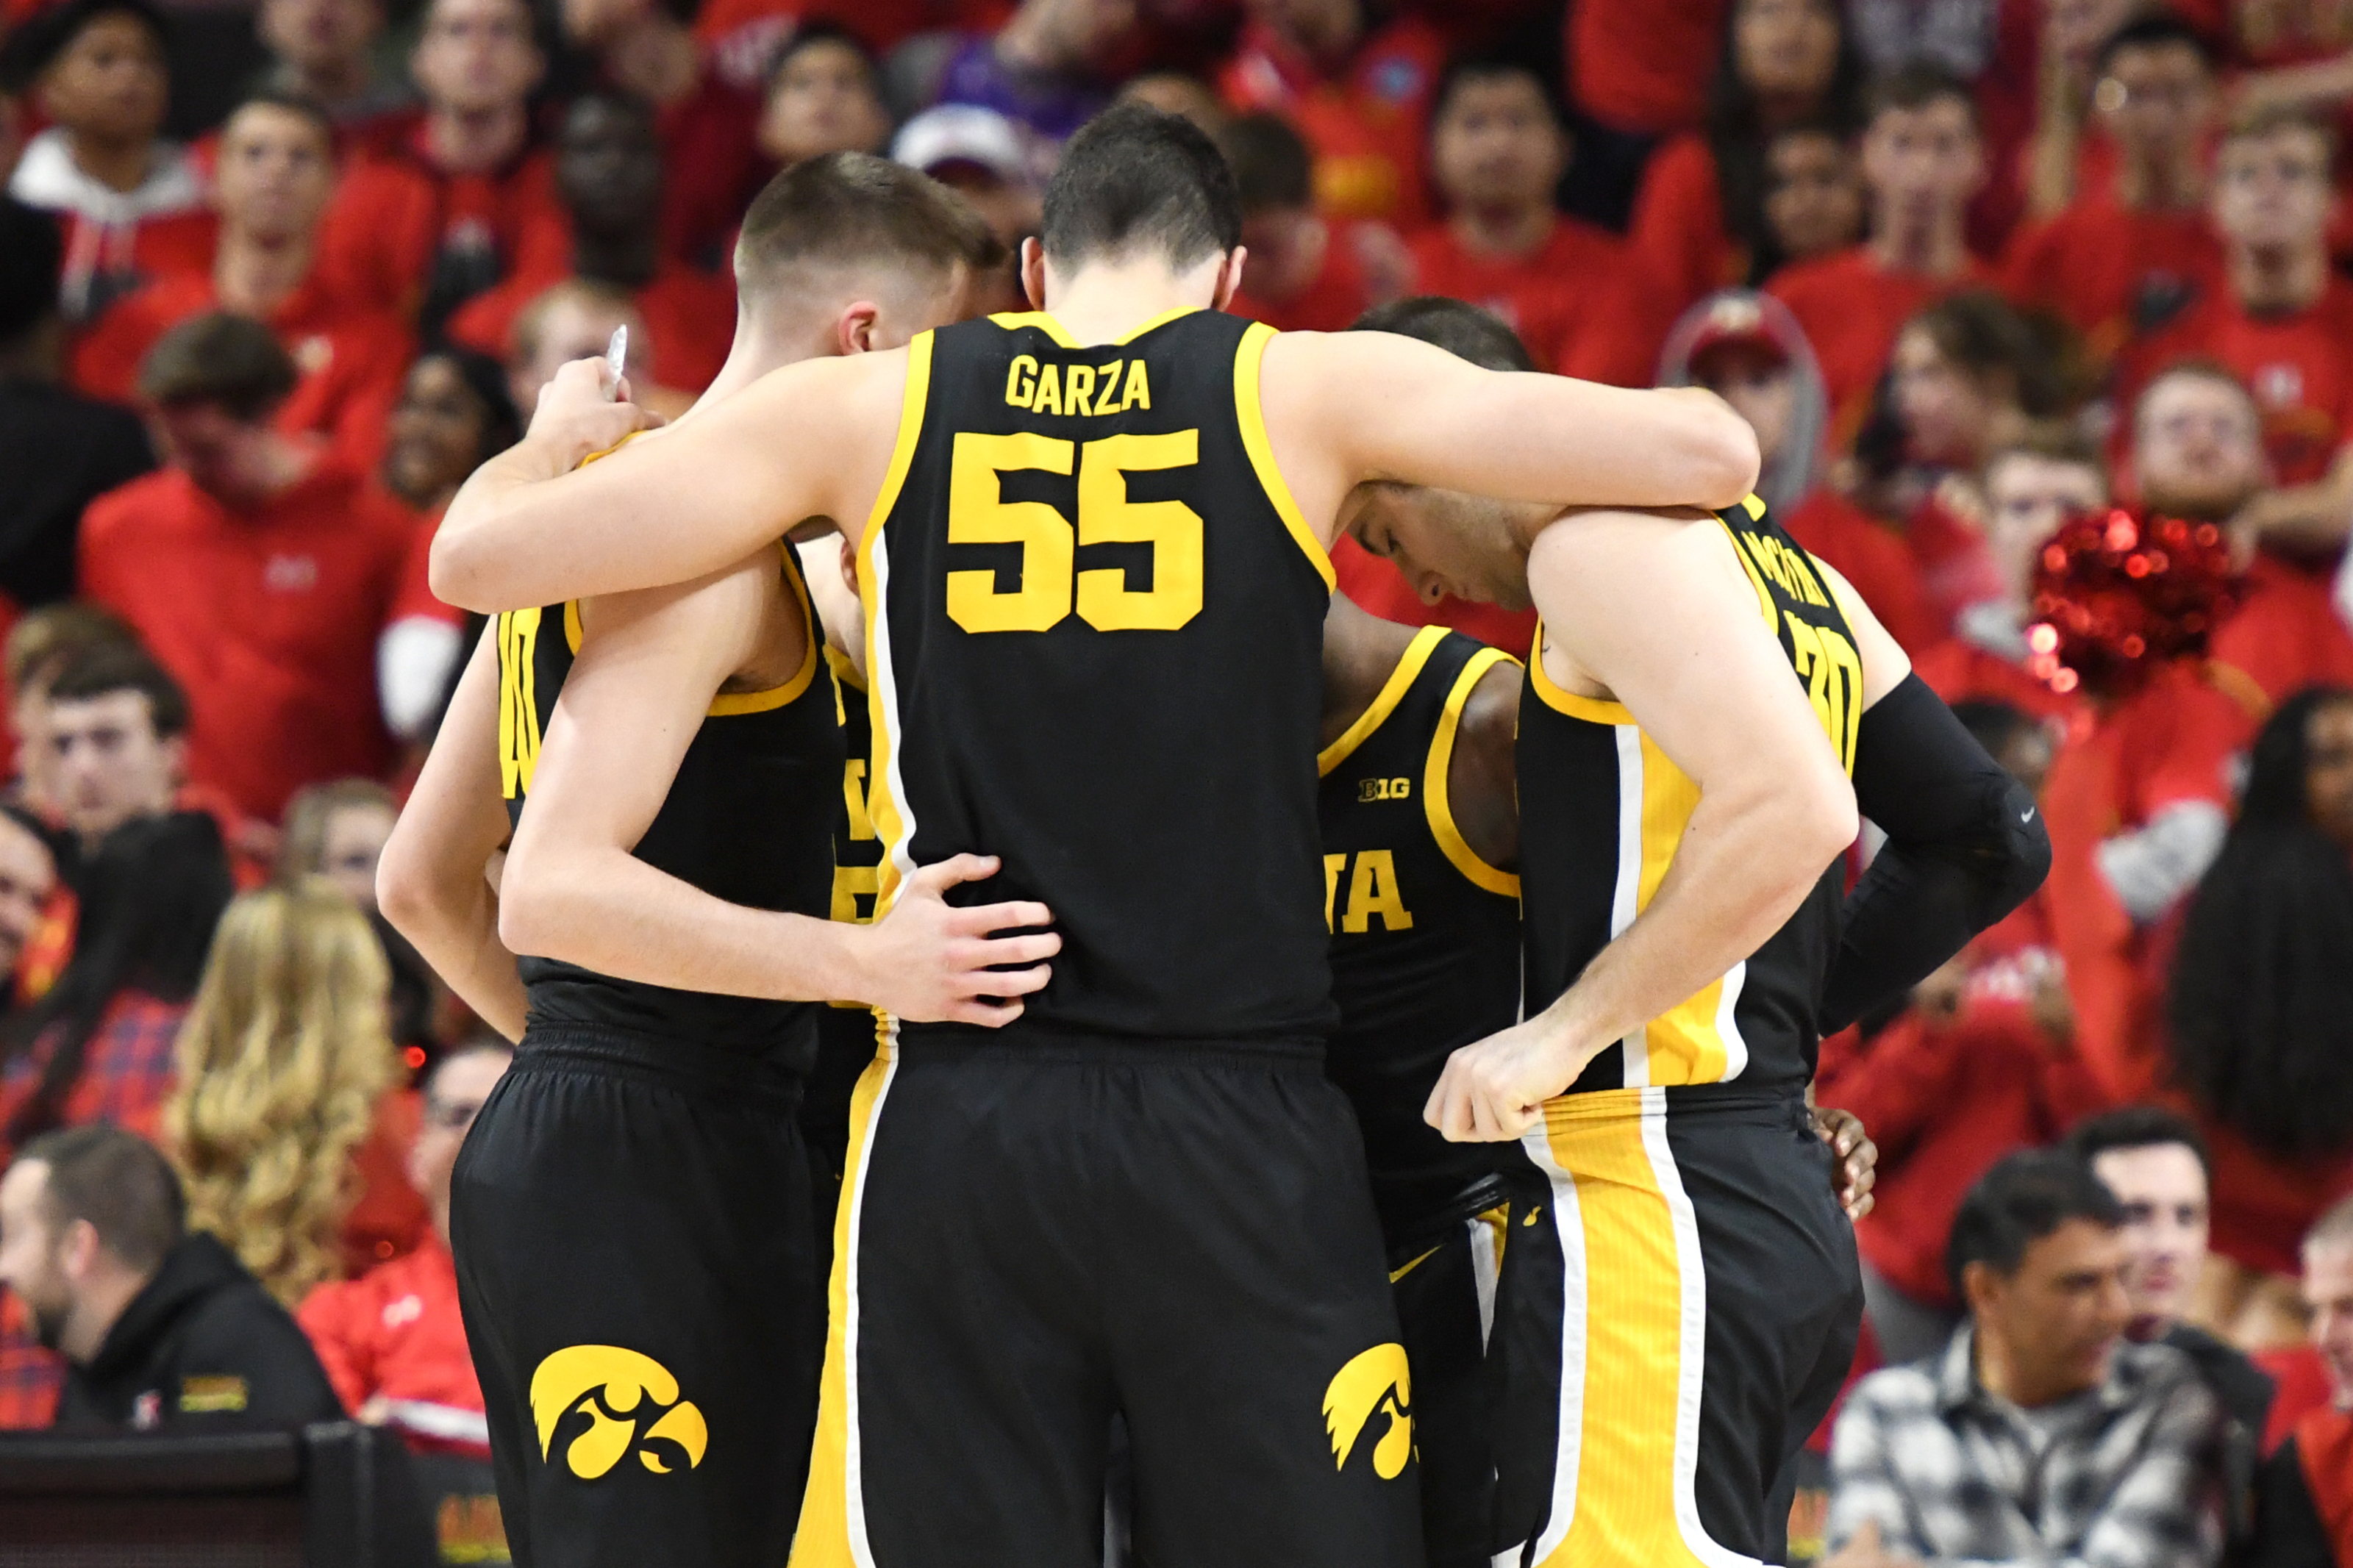 Iowa Basketball has 2nd best odds to win 2021 National Championship